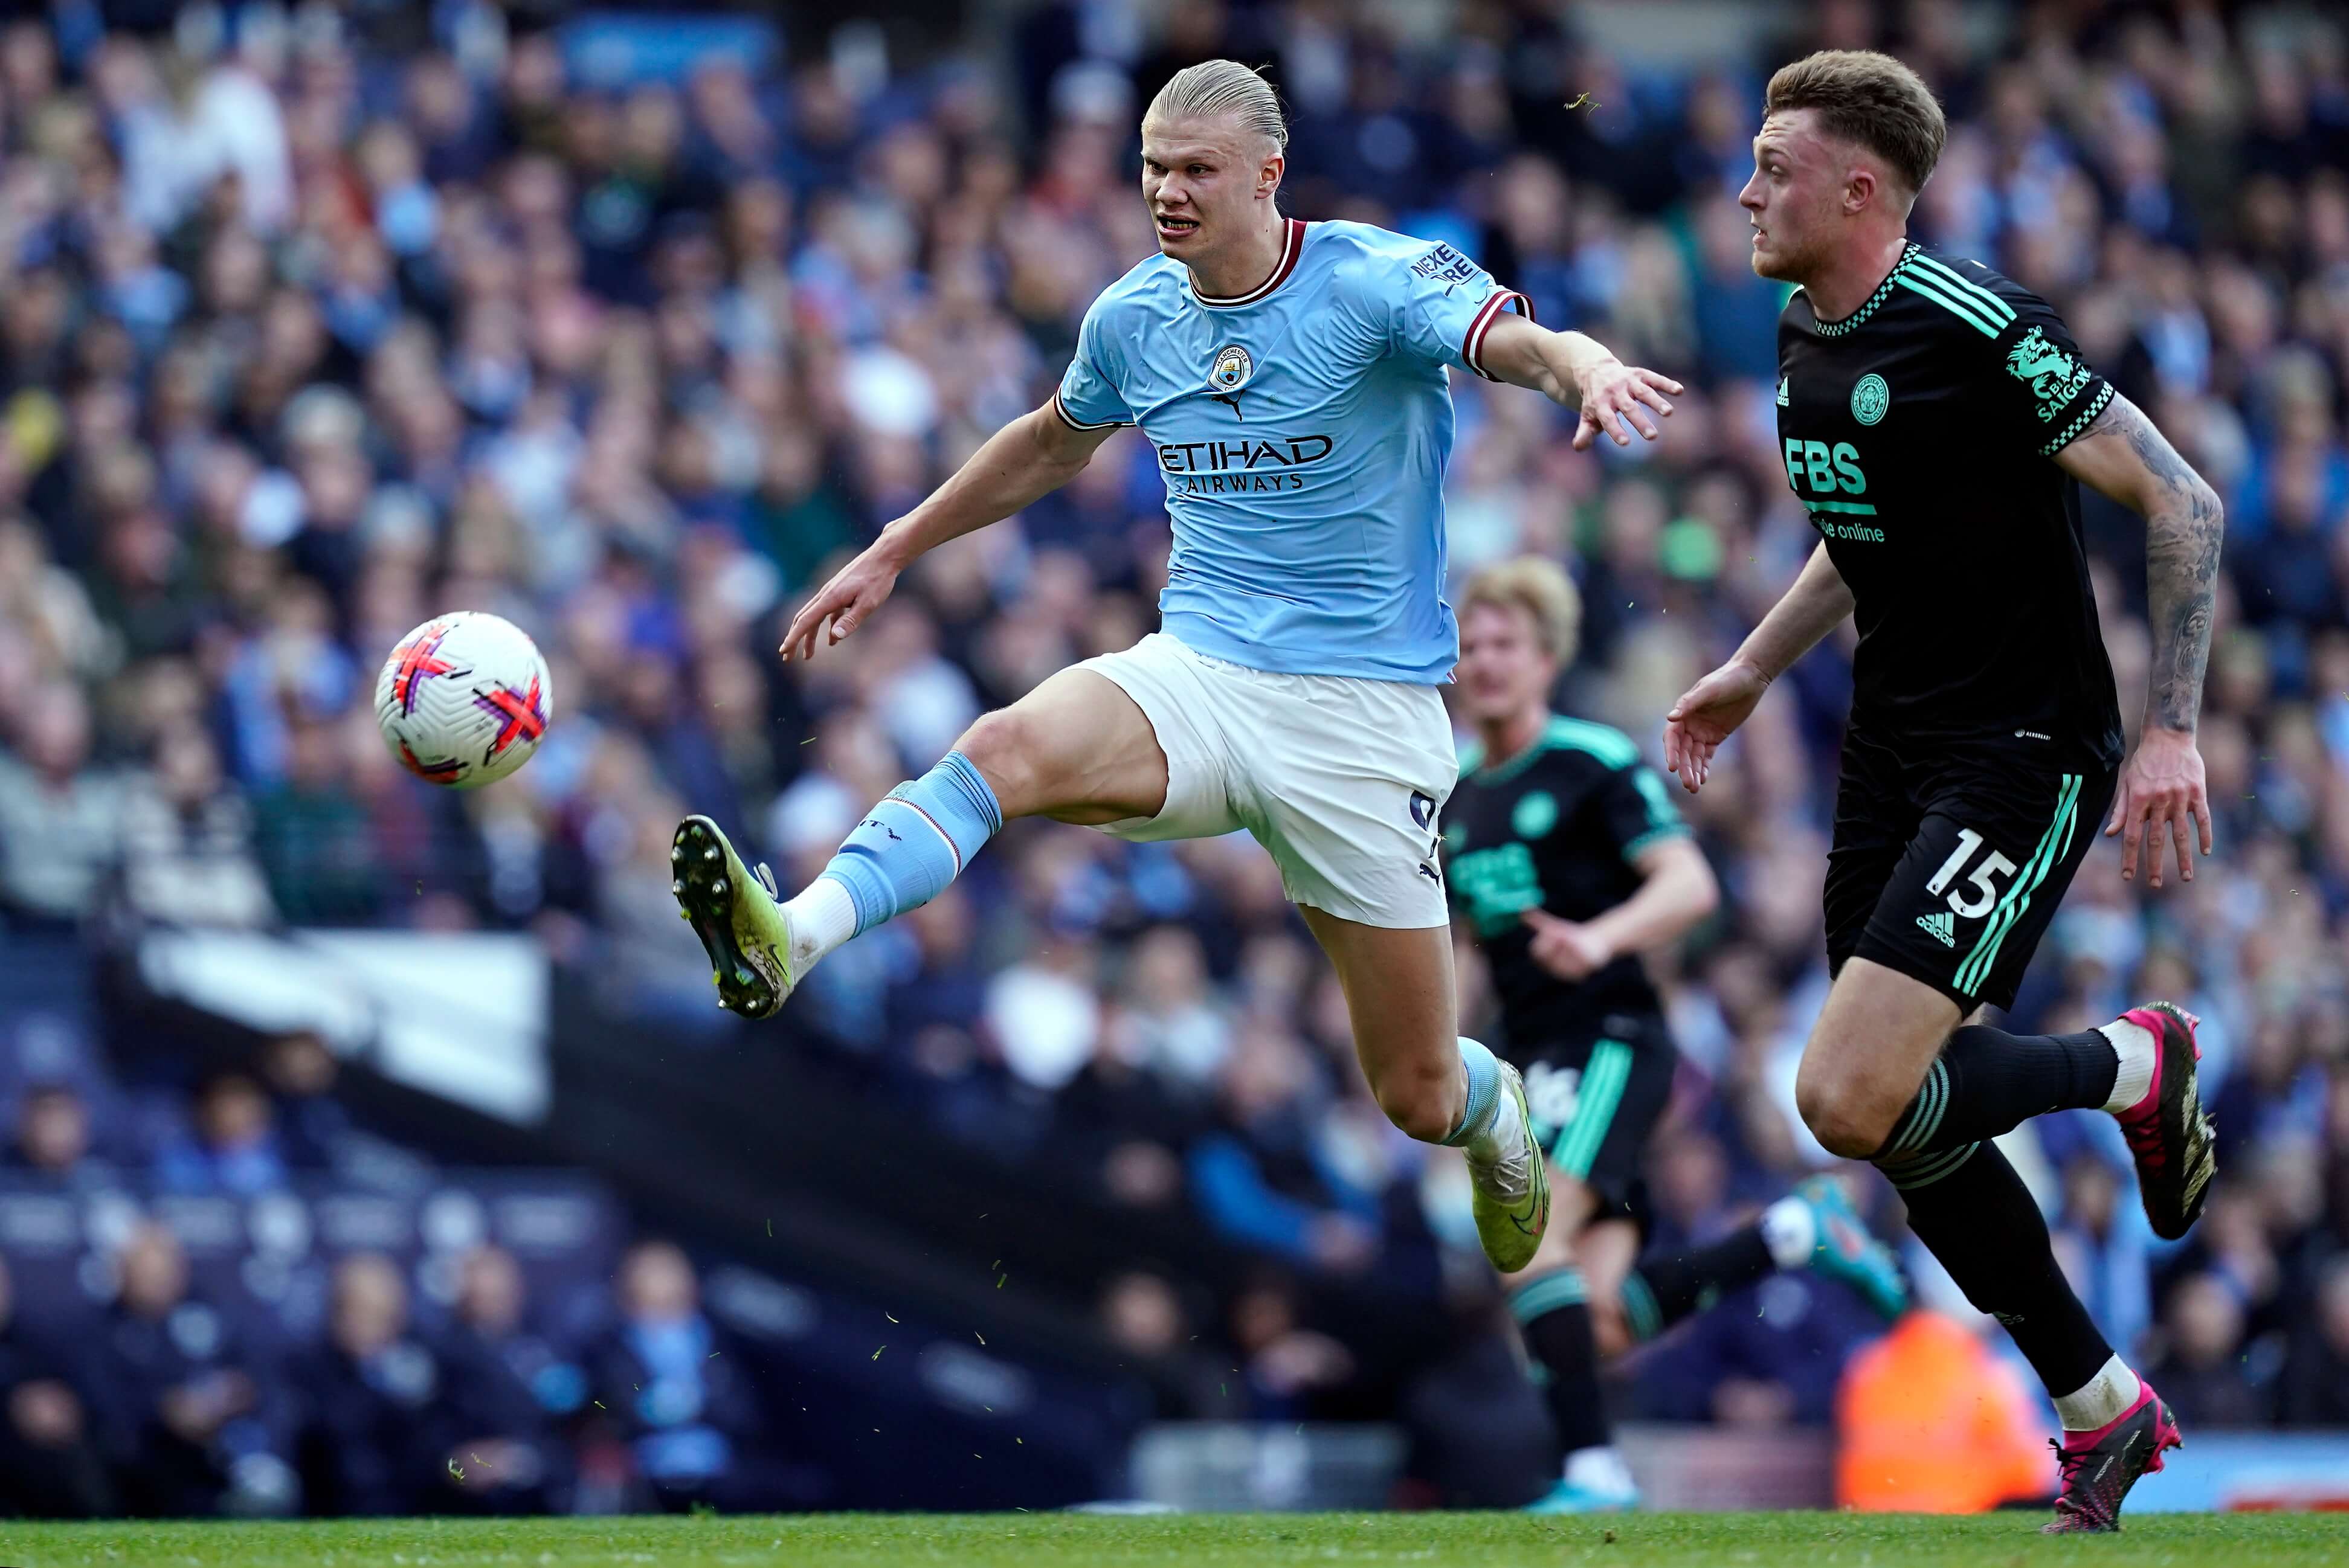 Watch a Manchester City vs Arsenal live stream from anywhere